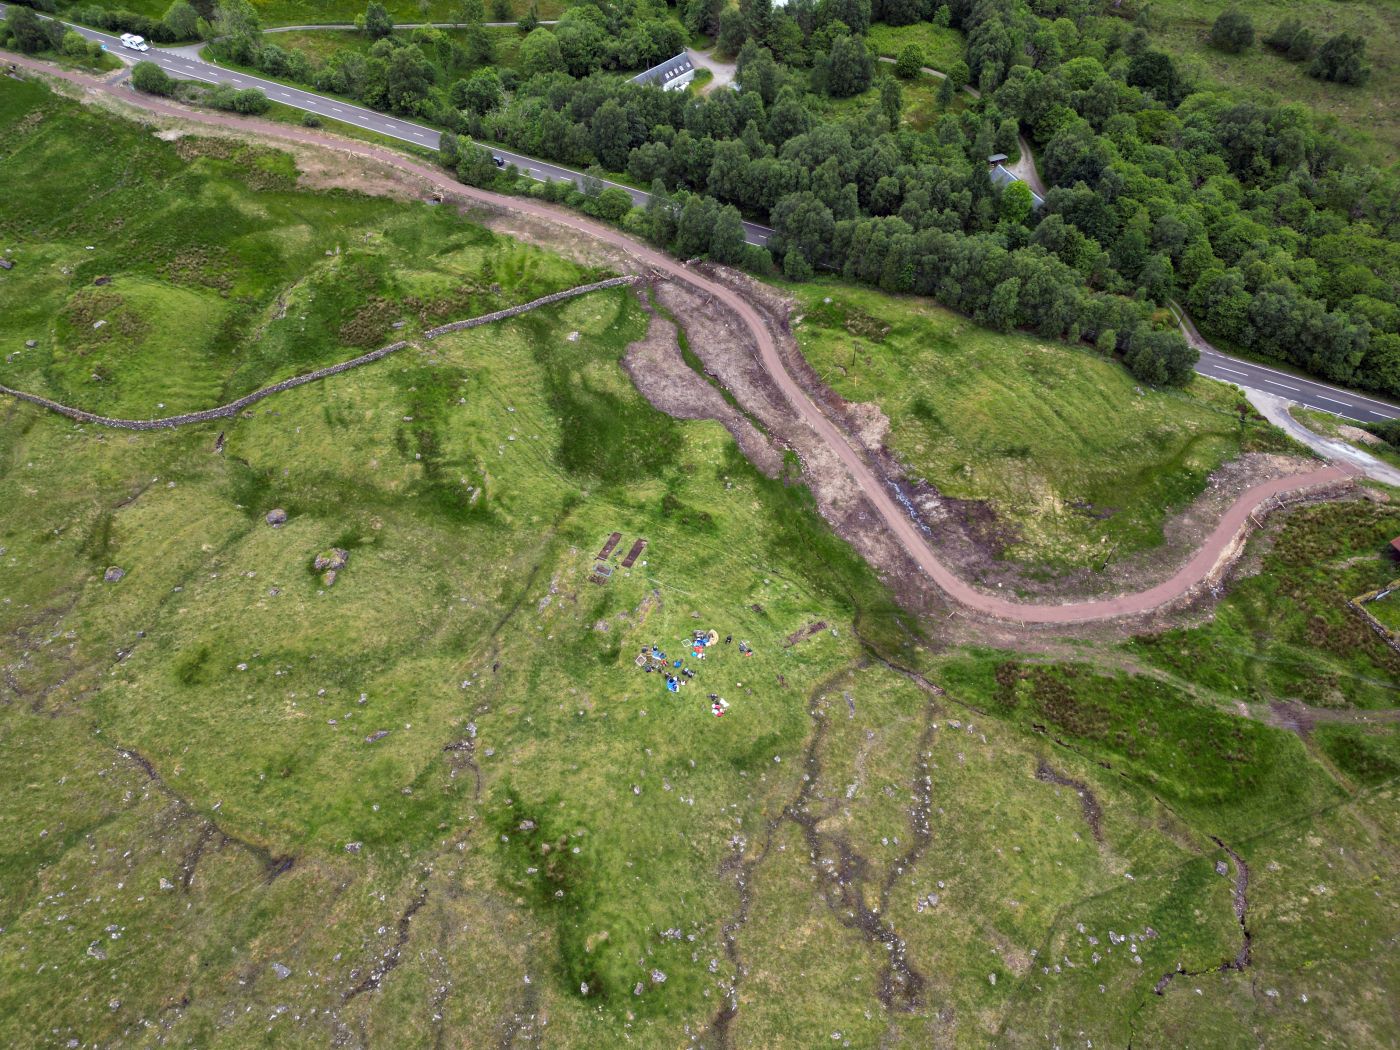 Drone photo of Glencoe settlement site and wider cultivated landscape by Aris Palyvos